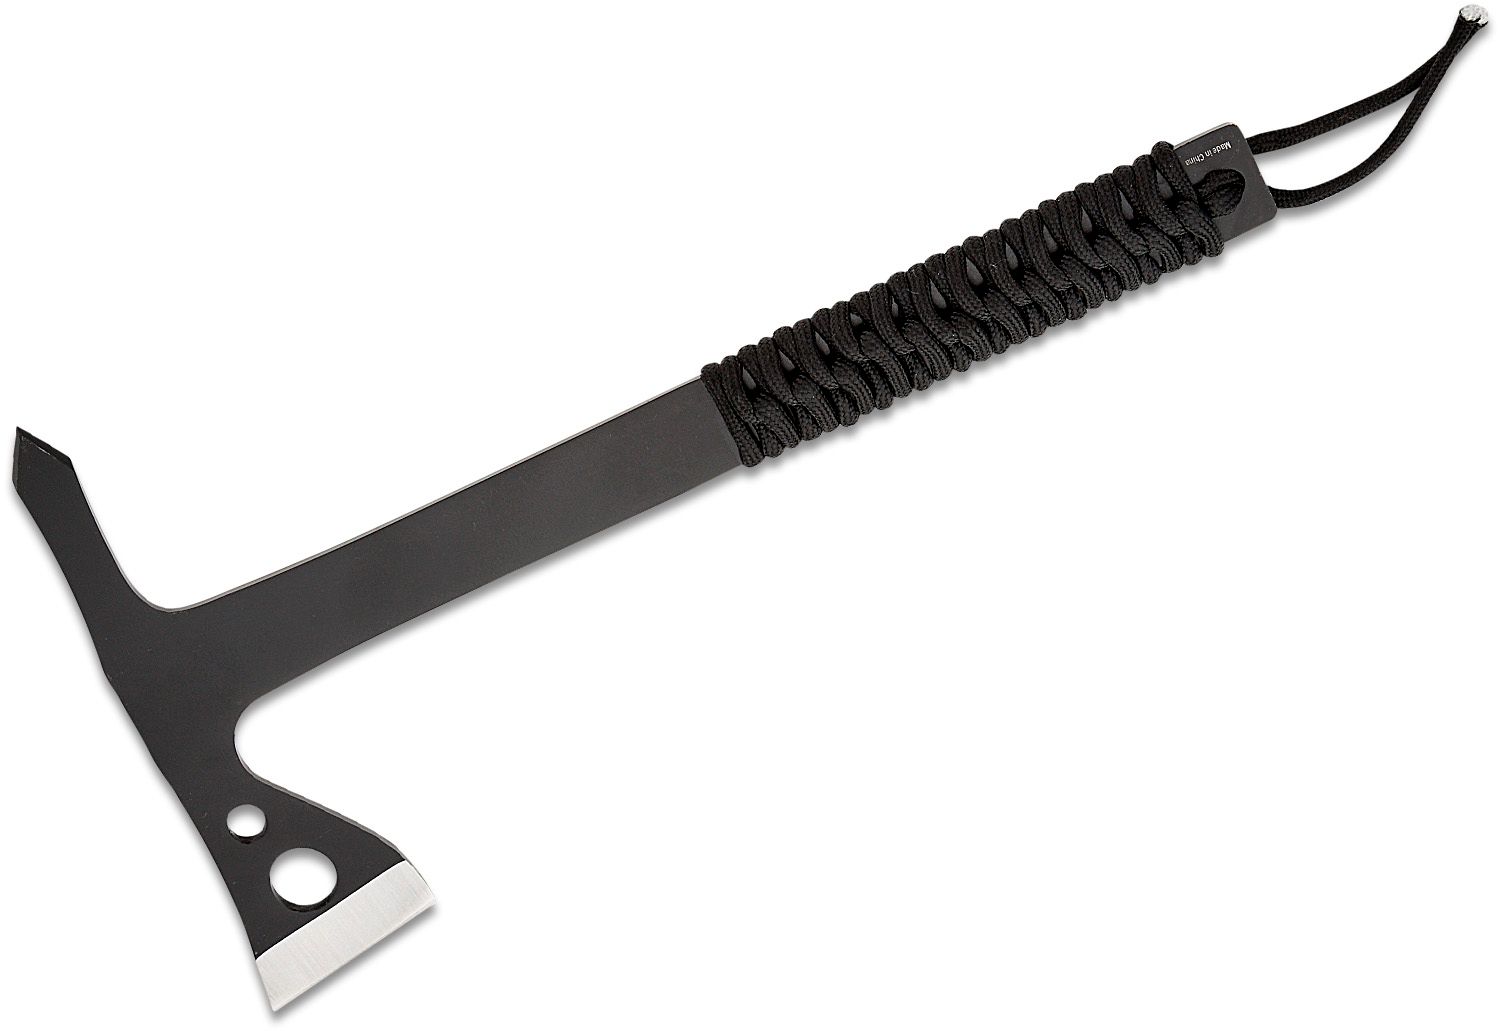 Cold Steel Throwing Axe 3-Pack, Black, 10.75